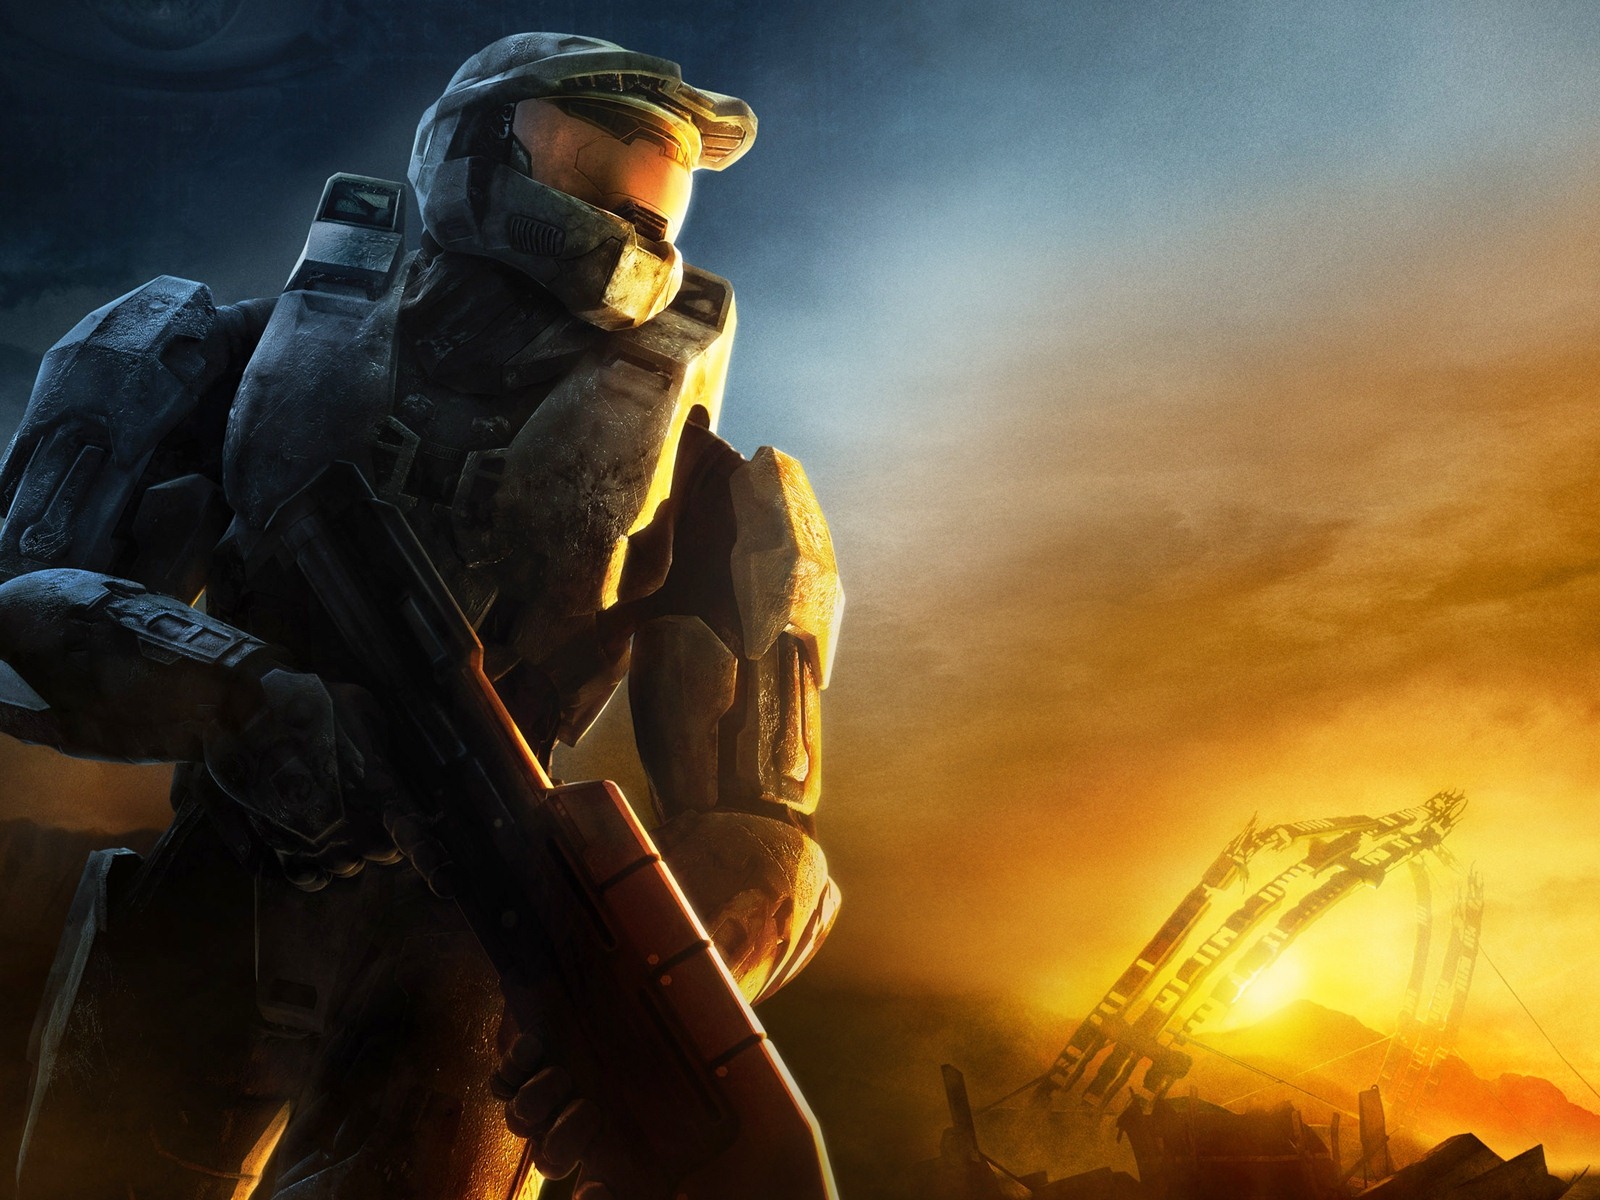 Halo game HD wallpapers #22 - 1600x1200